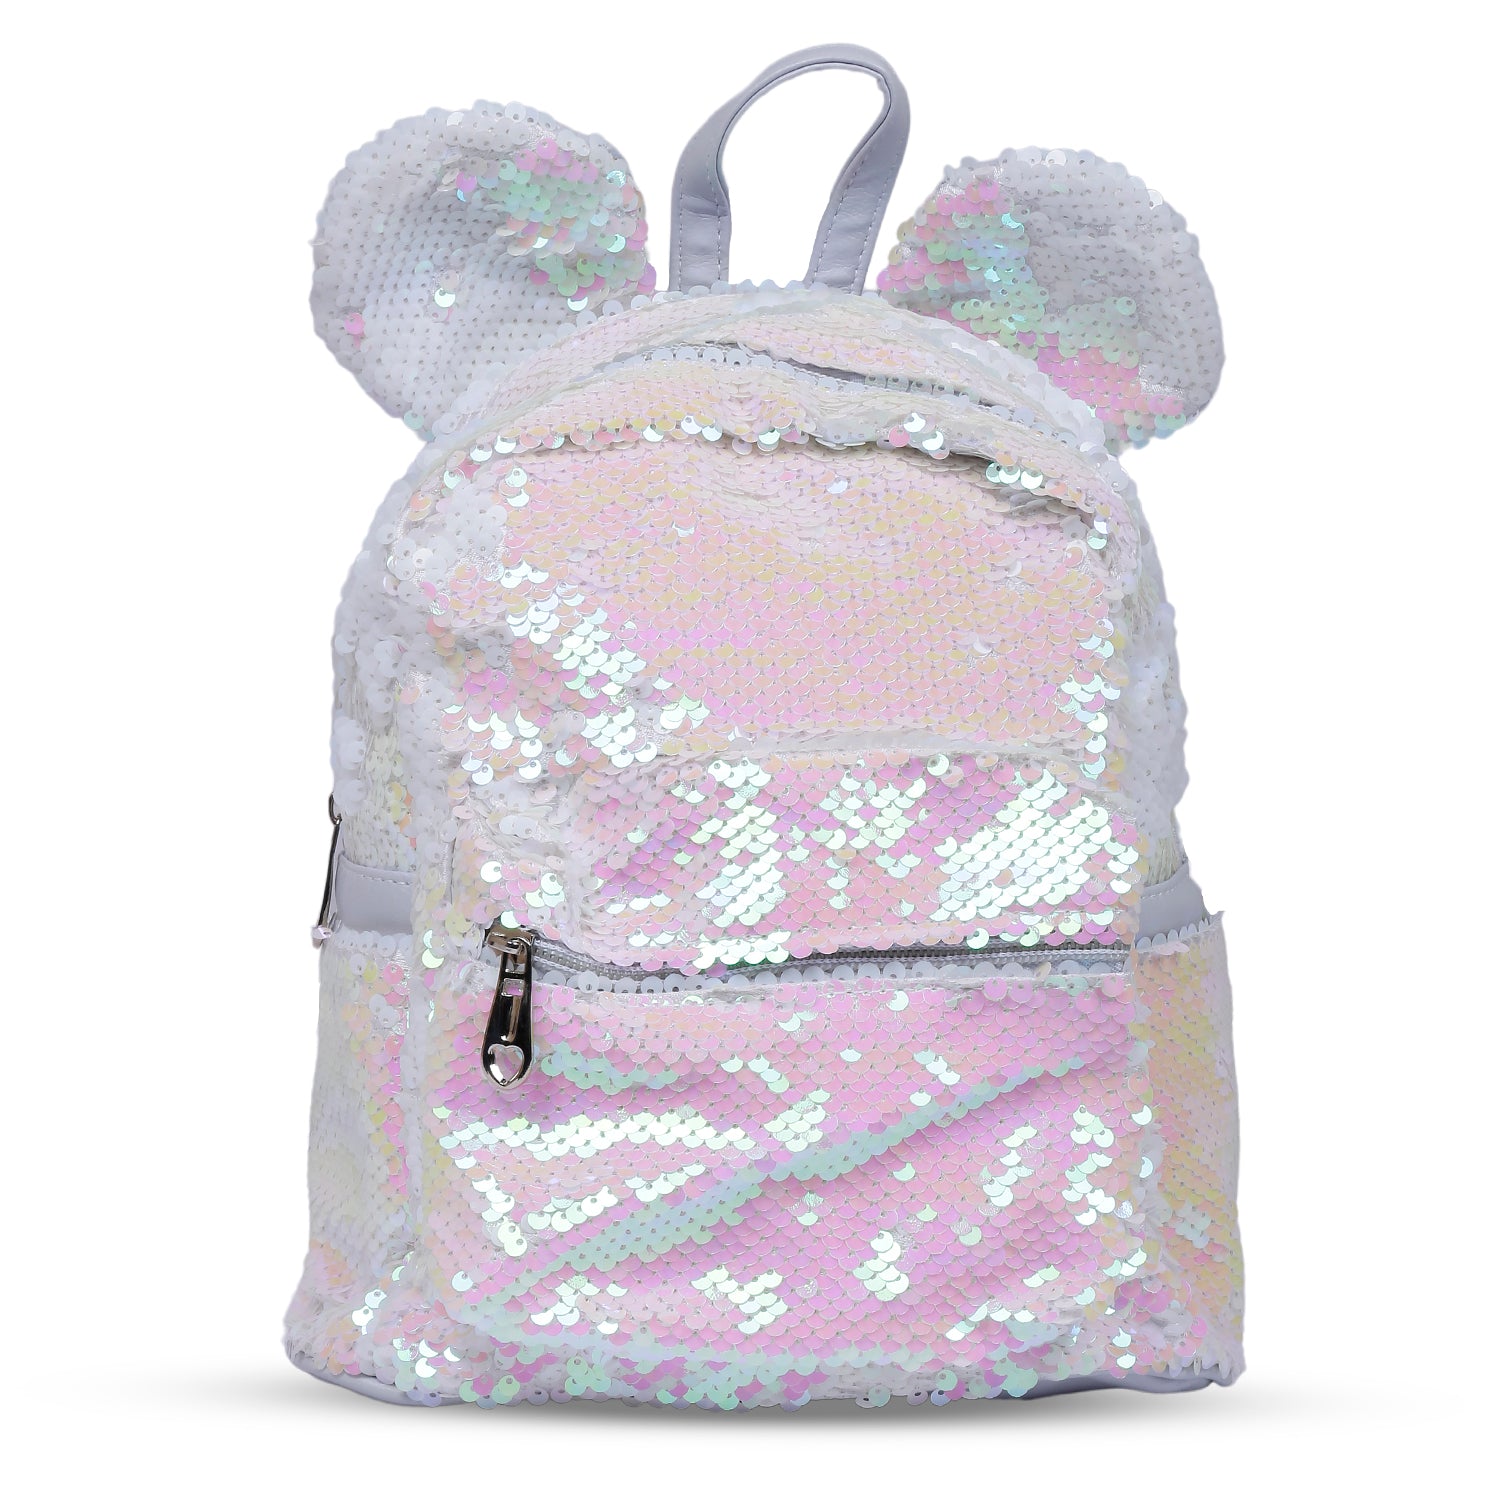 Sequined Dual Tone Backpack Trendy Bag - White, Pink